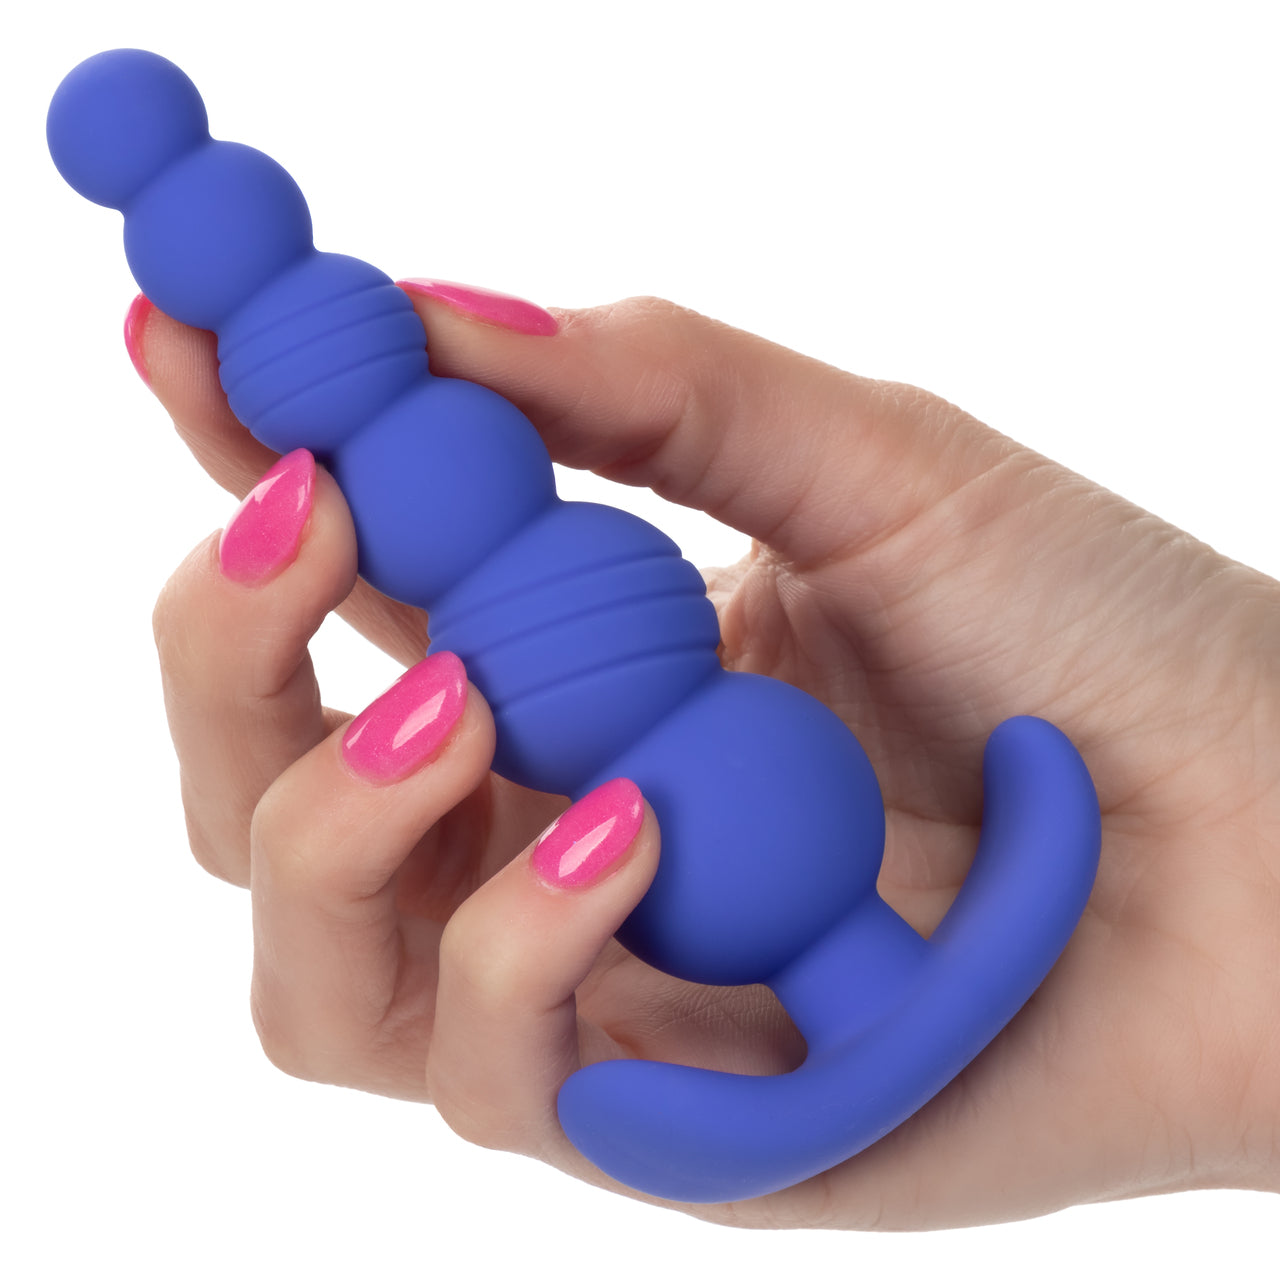 Cheeky X-6 Beads - Thorn & Feather Sex Toy Canada